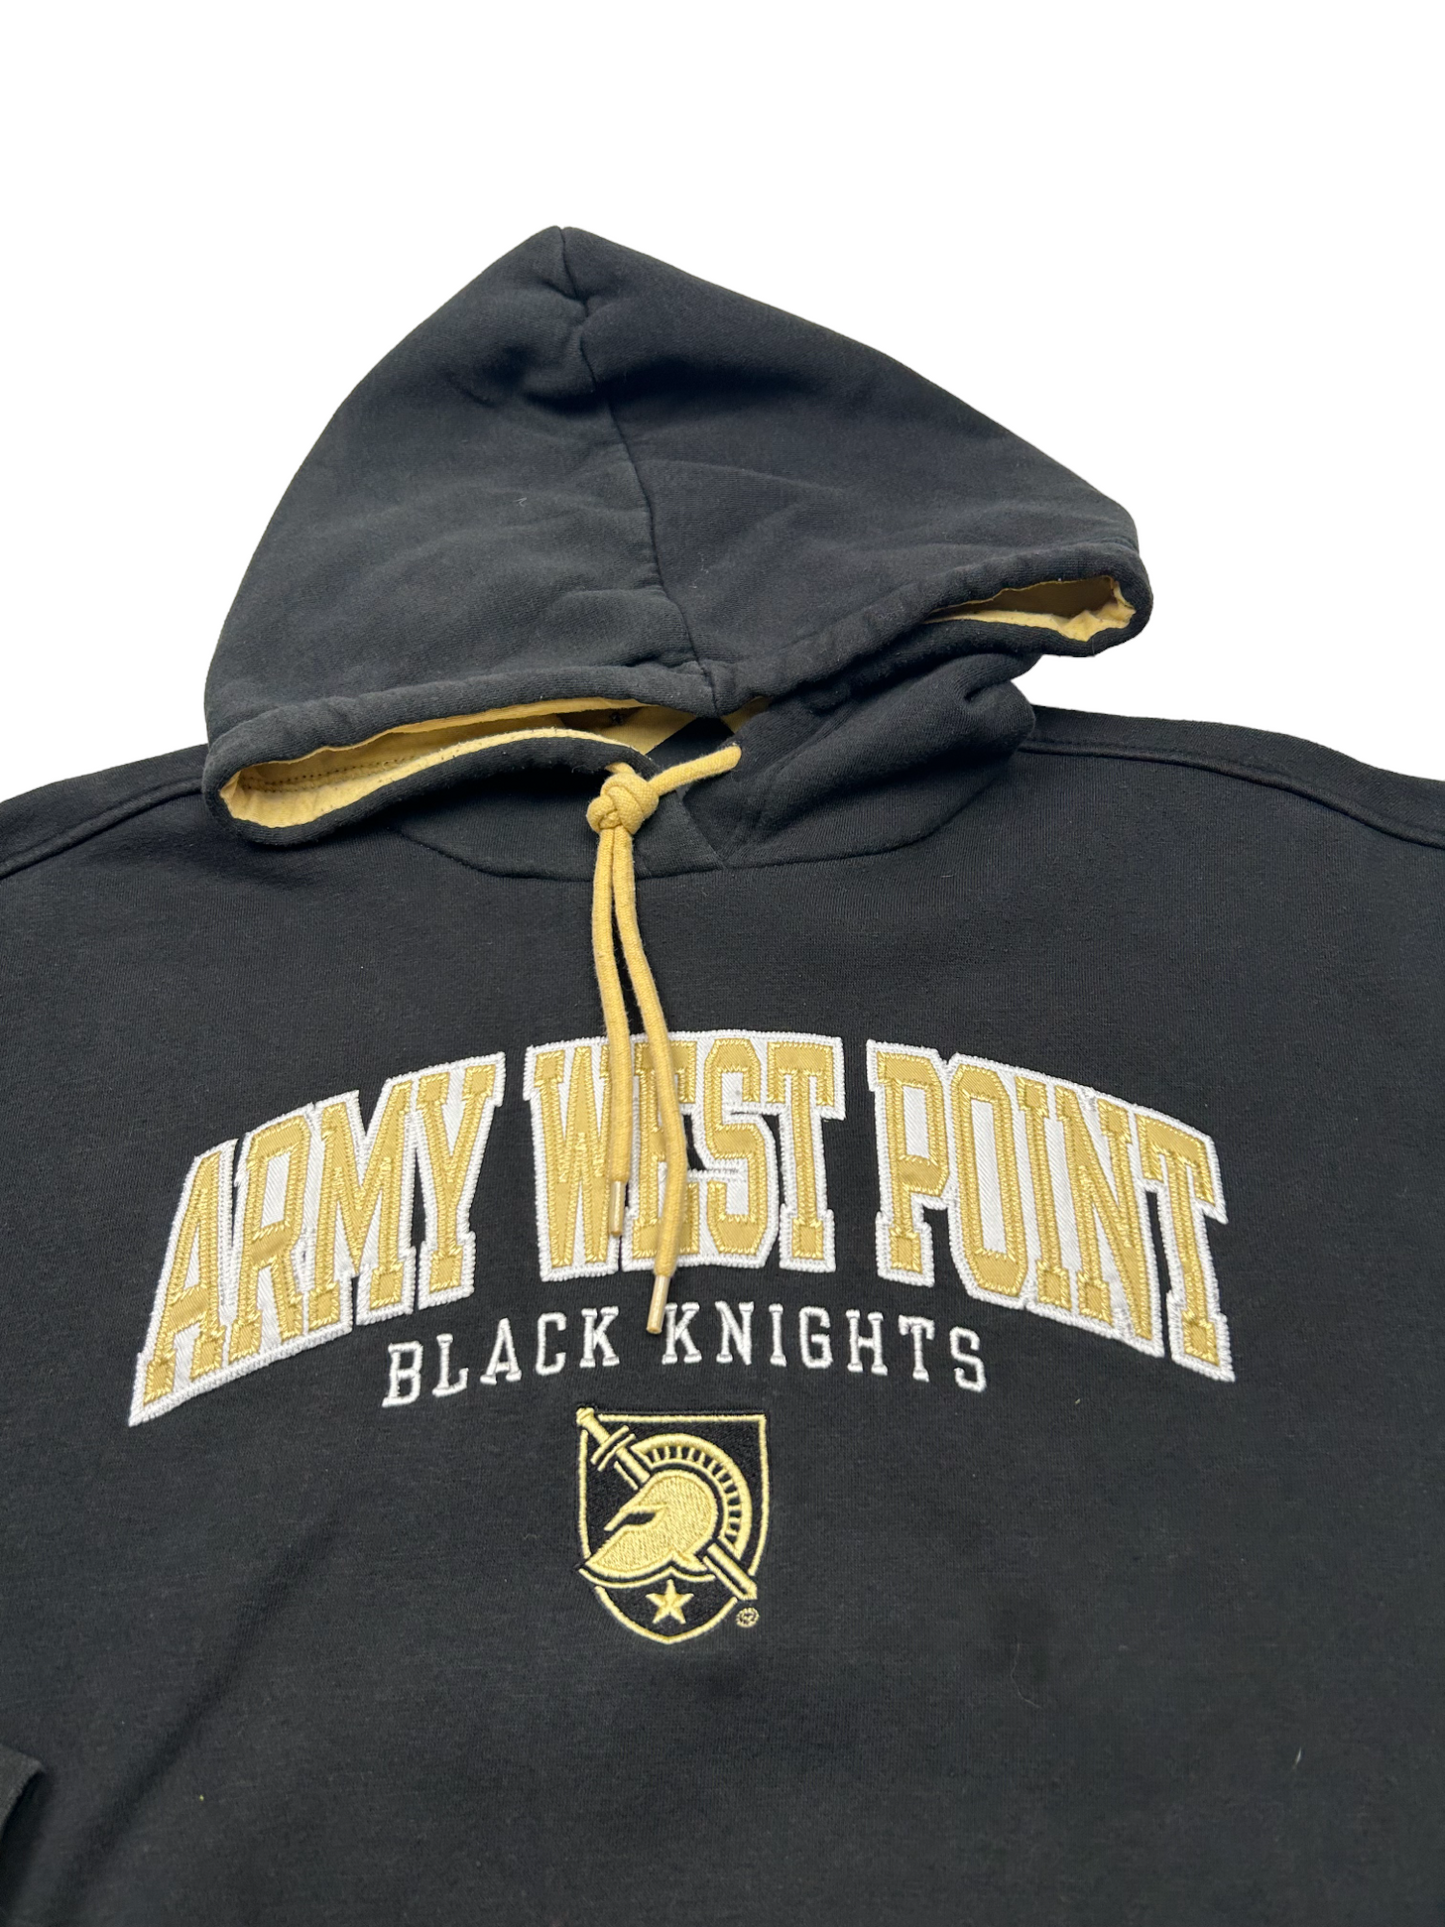 Army West Point Hoodie